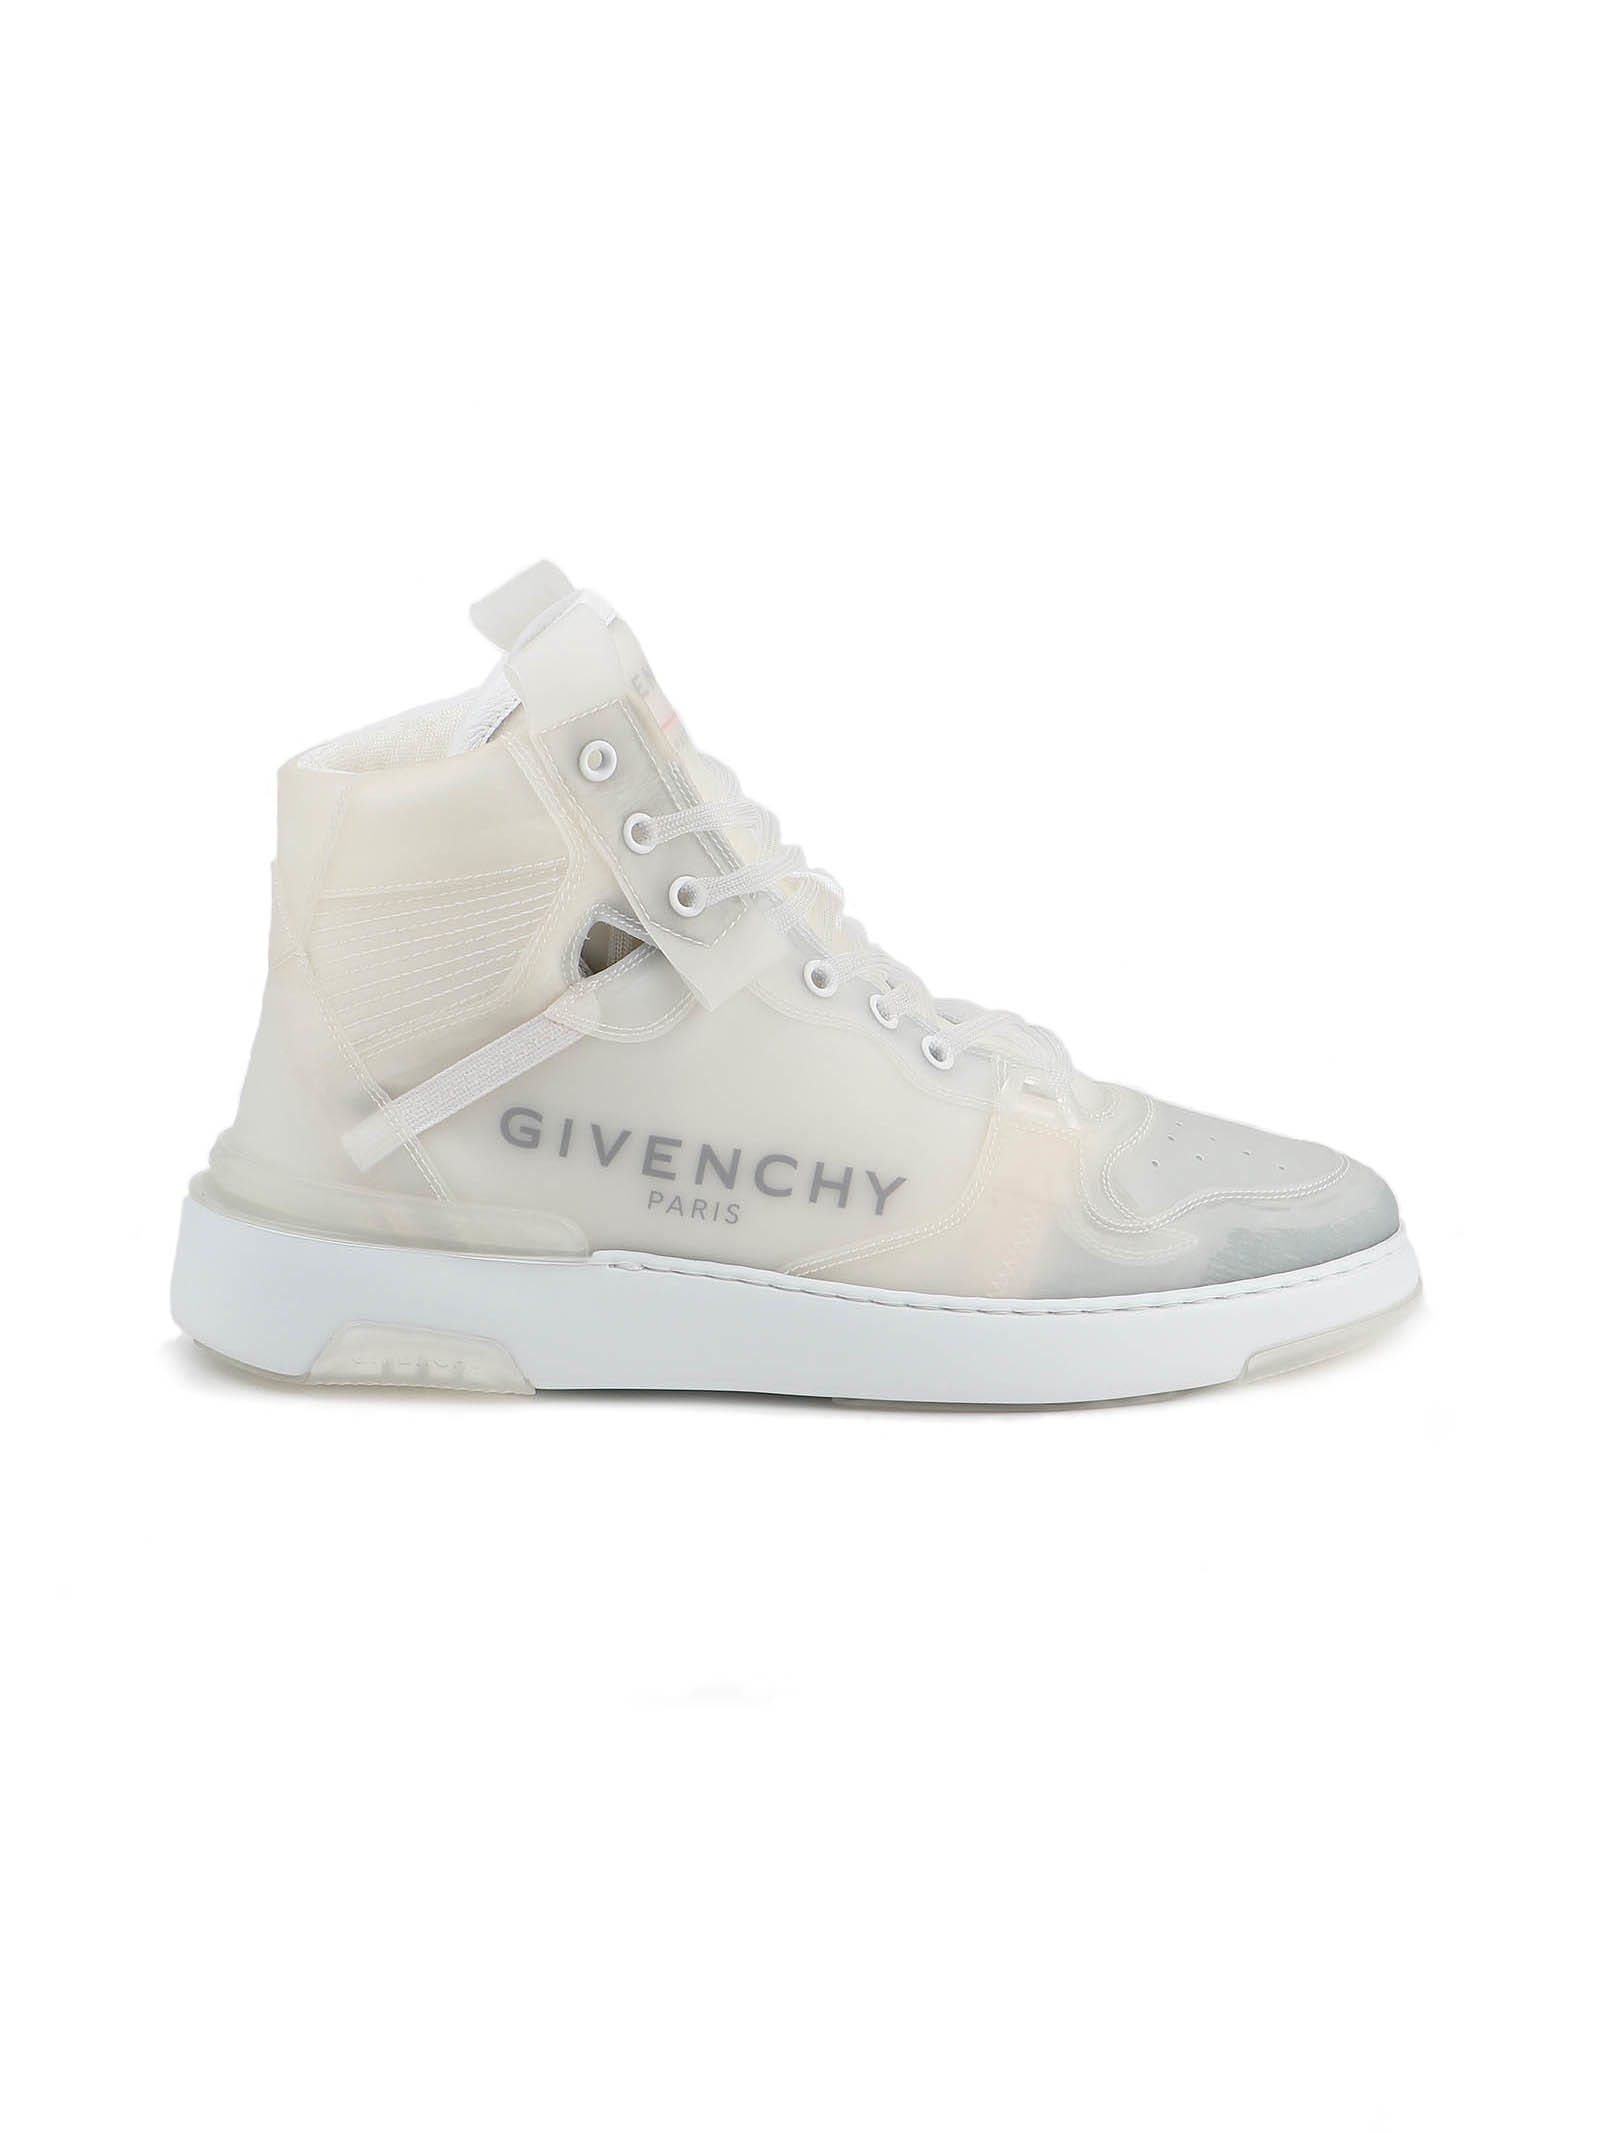 GIVENCHY WING HIGH SNEAKER,11291494